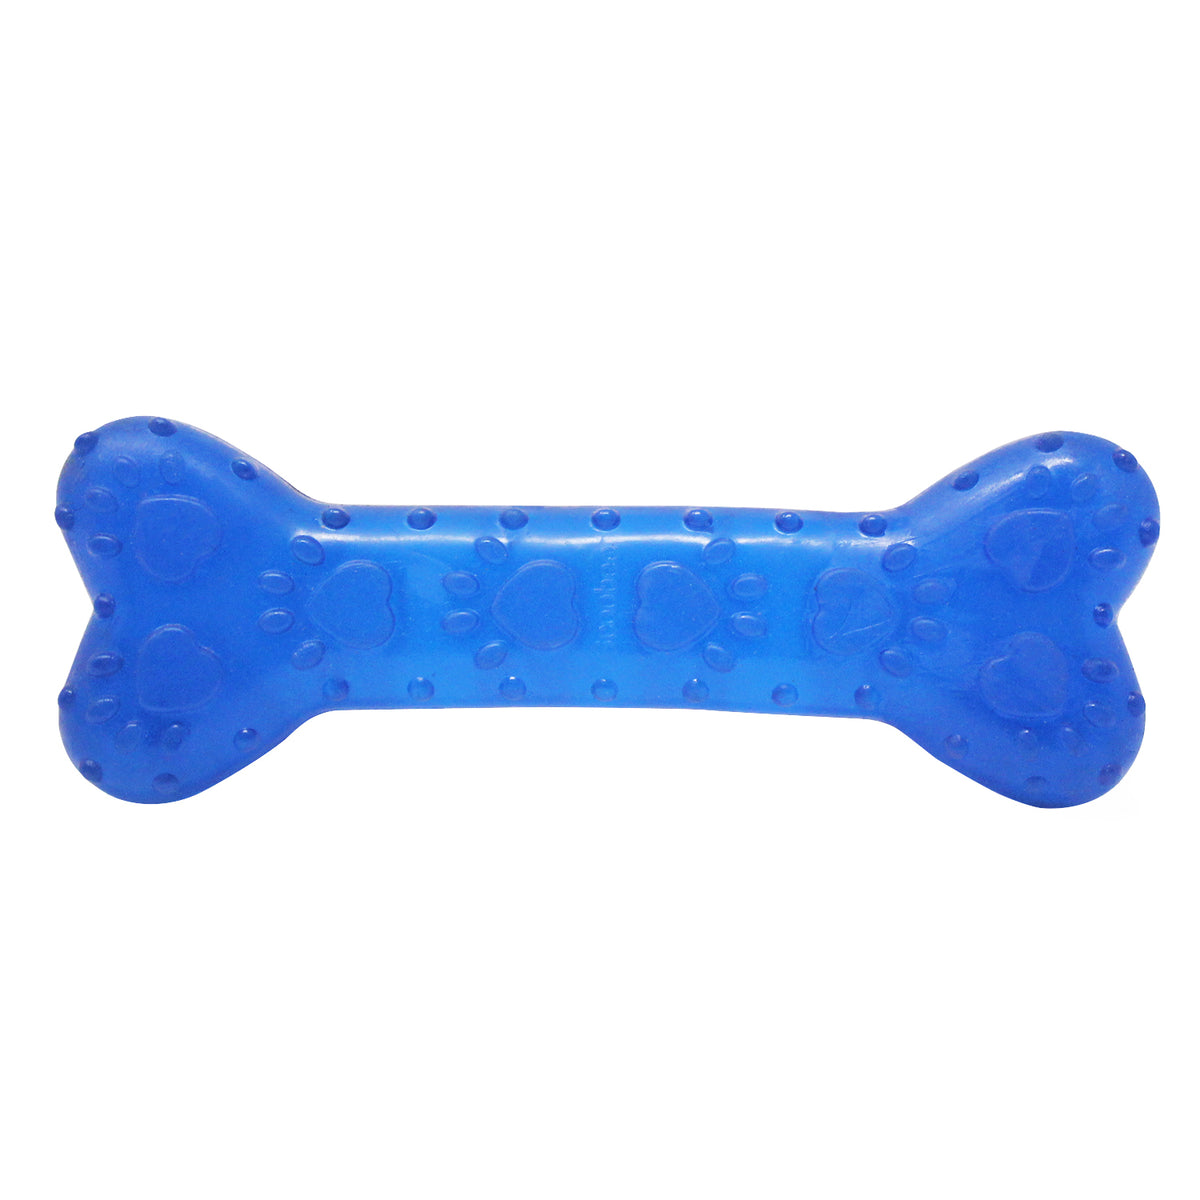 Gearbuff Paw Printed Transparent Bone Toy,Small, Blue